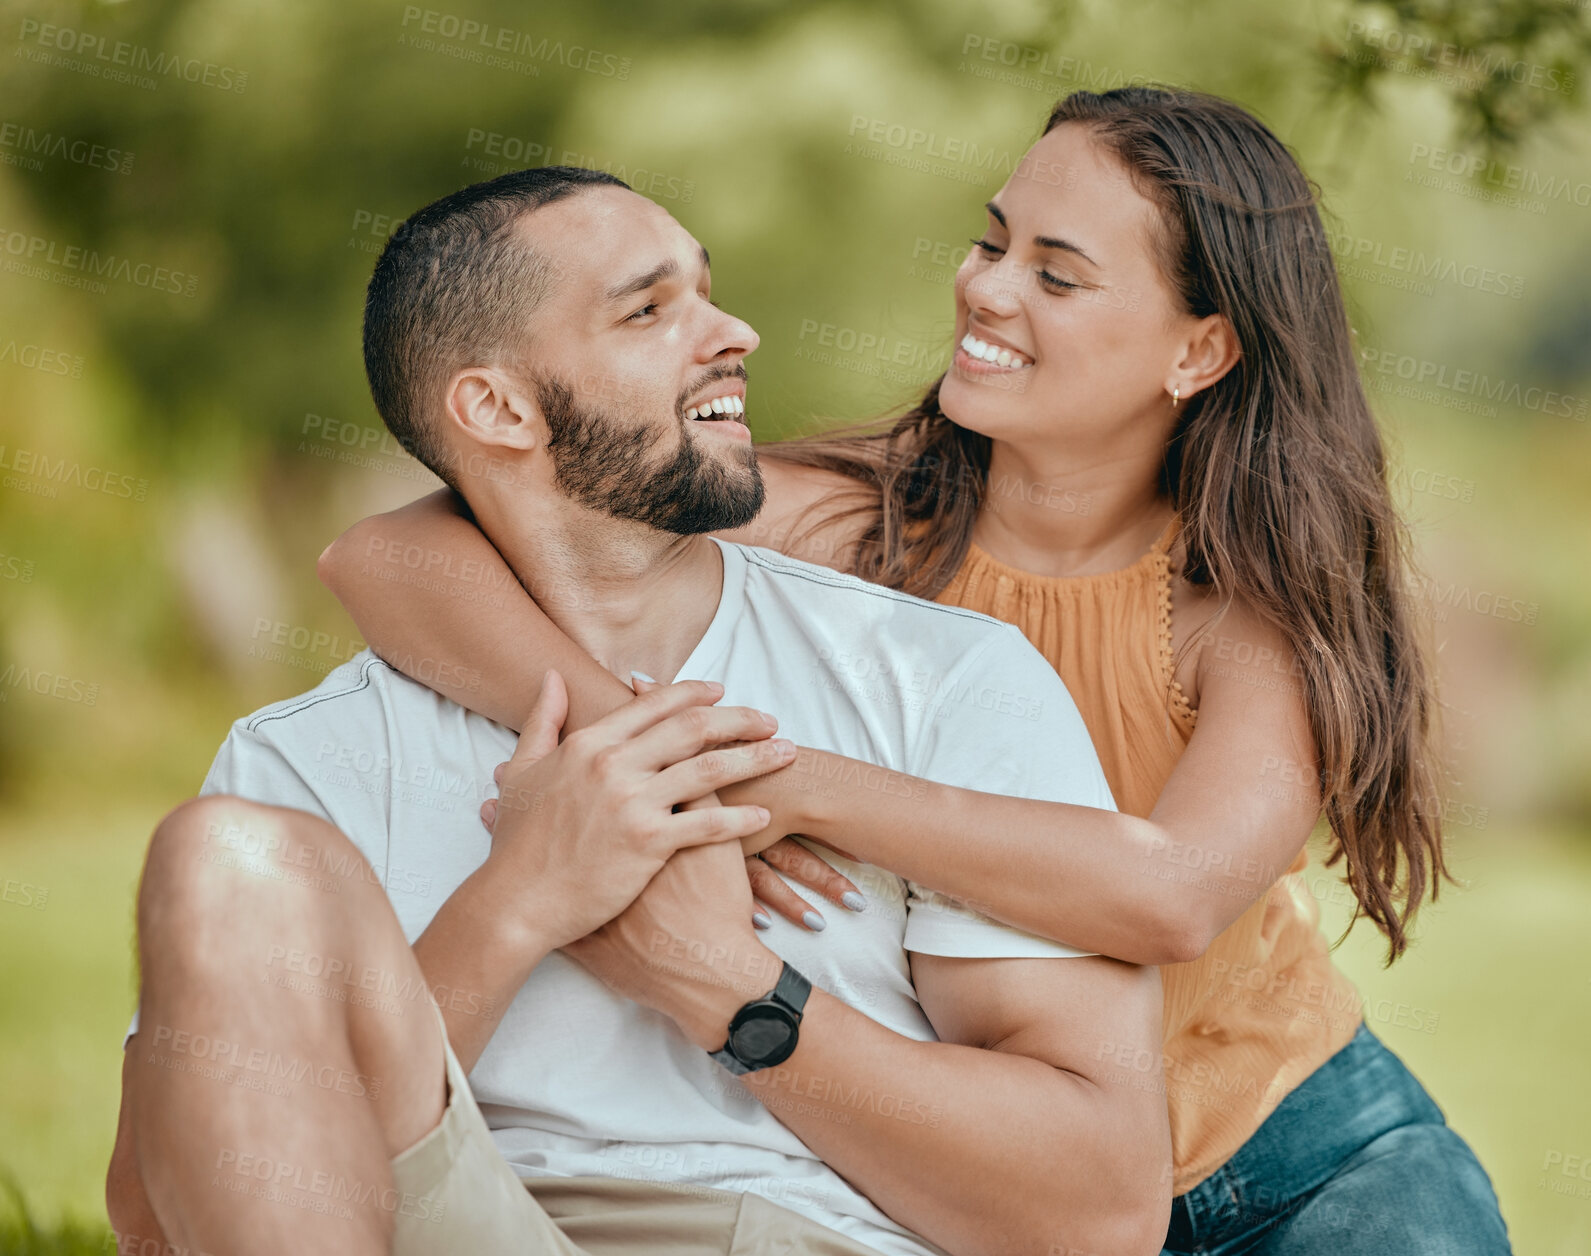 Buy stock photo Couple, love hug and relax at park, nature or outdoors on vacation or holiday trip. Support, romance and man bonding with woman outside, enjoying quality time together and having fun on date.



